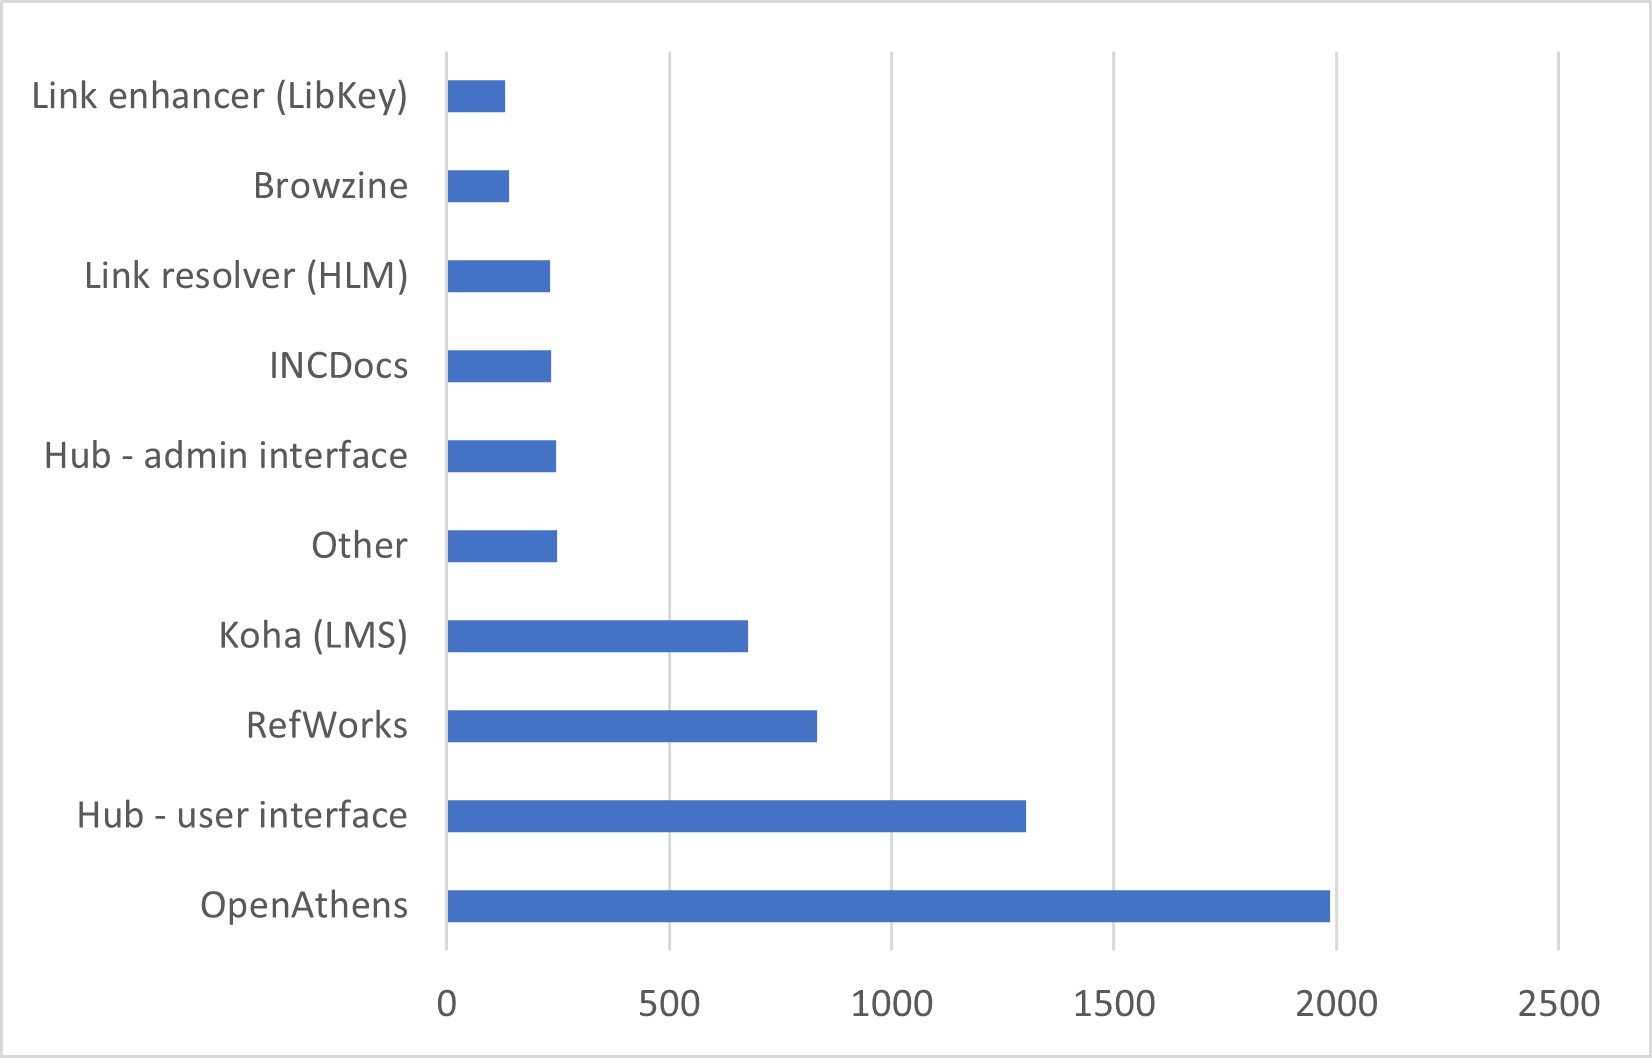 Top 10 categories by number of tickets